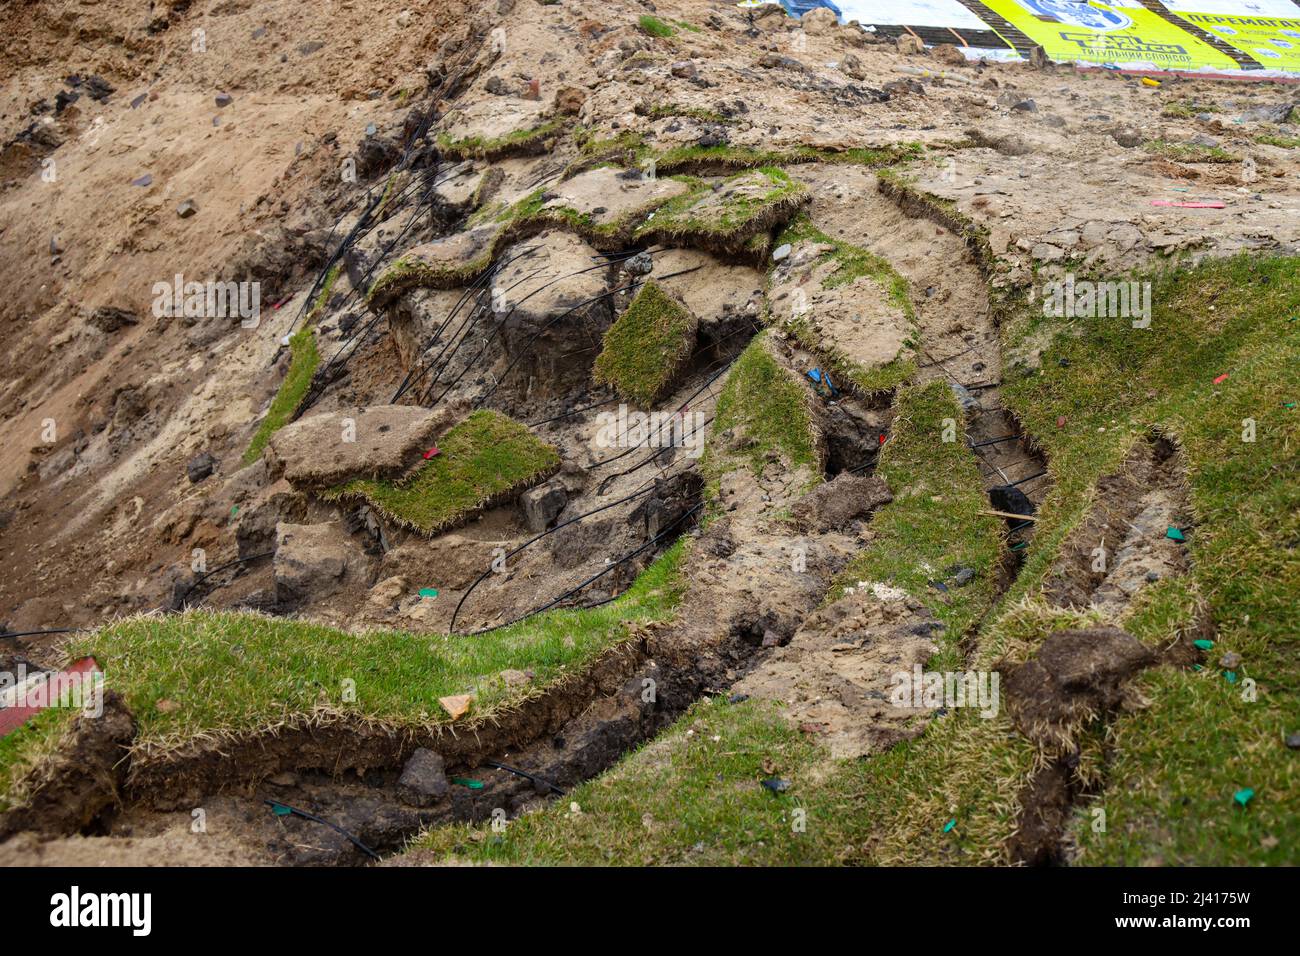 CHERNIHIV, UKRAINE - APRIL 9, 2022 - The damaged turf is seen by the edge of a crater at the Chernihiv Olympic Sports Training Centre (formerly Yuri G Stock Photo